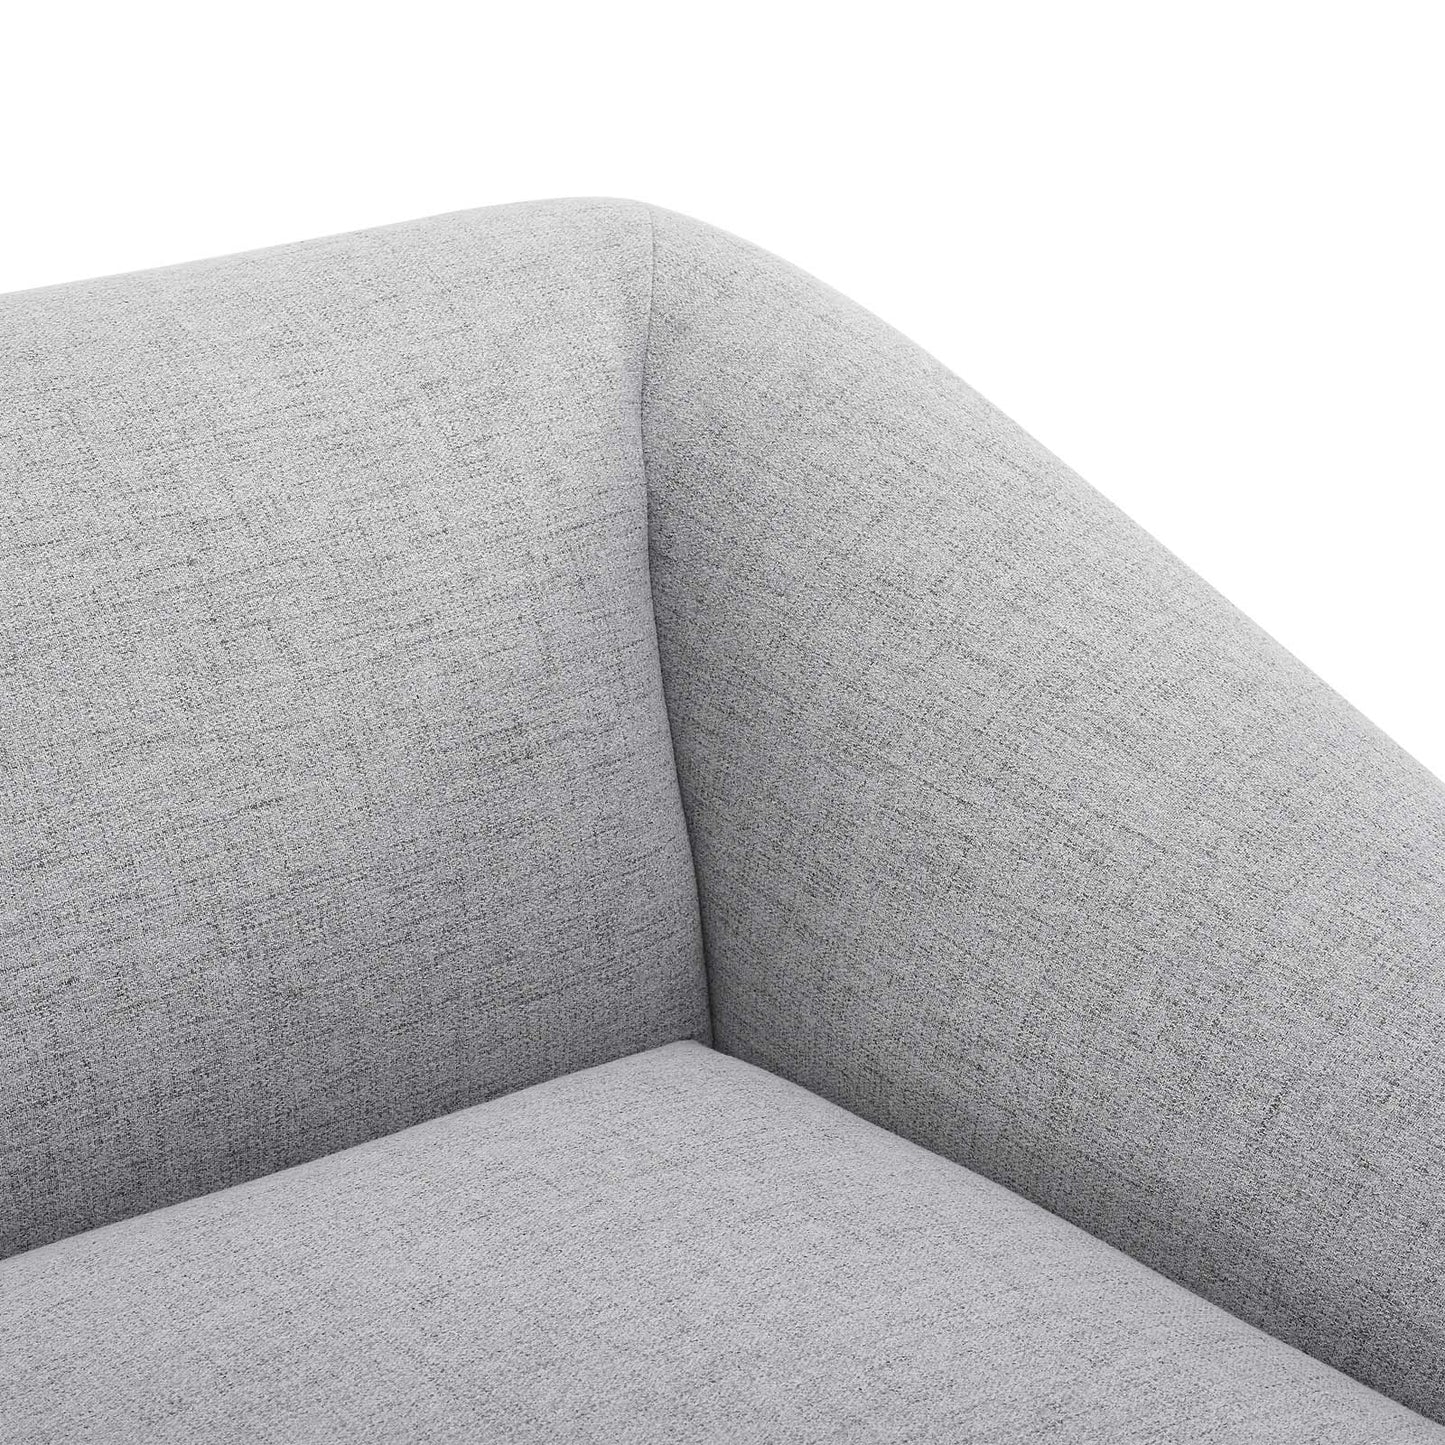 Comprise Right-Arm Sectional Sofa Chair Light Gray EEI-4416-LGR